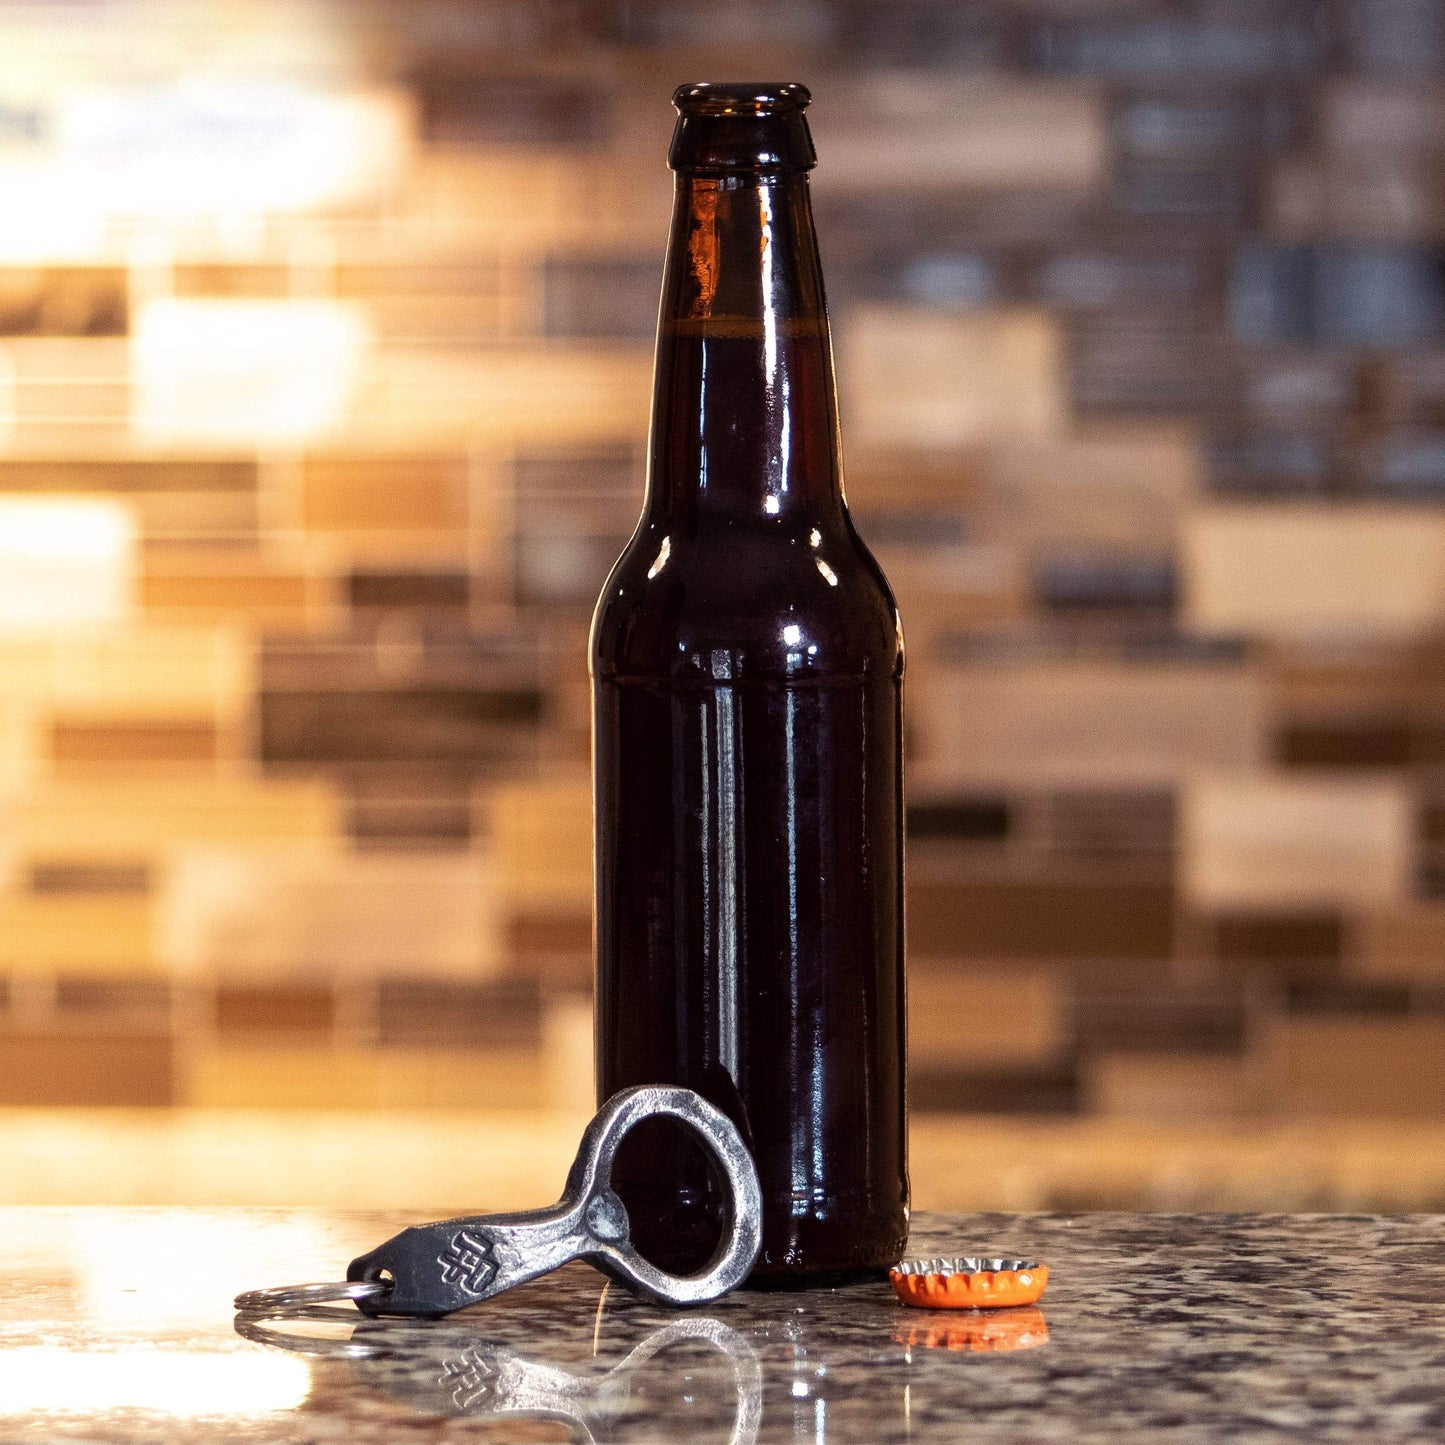 Hand Forged Keychain Bottle Opener - The Tool Store